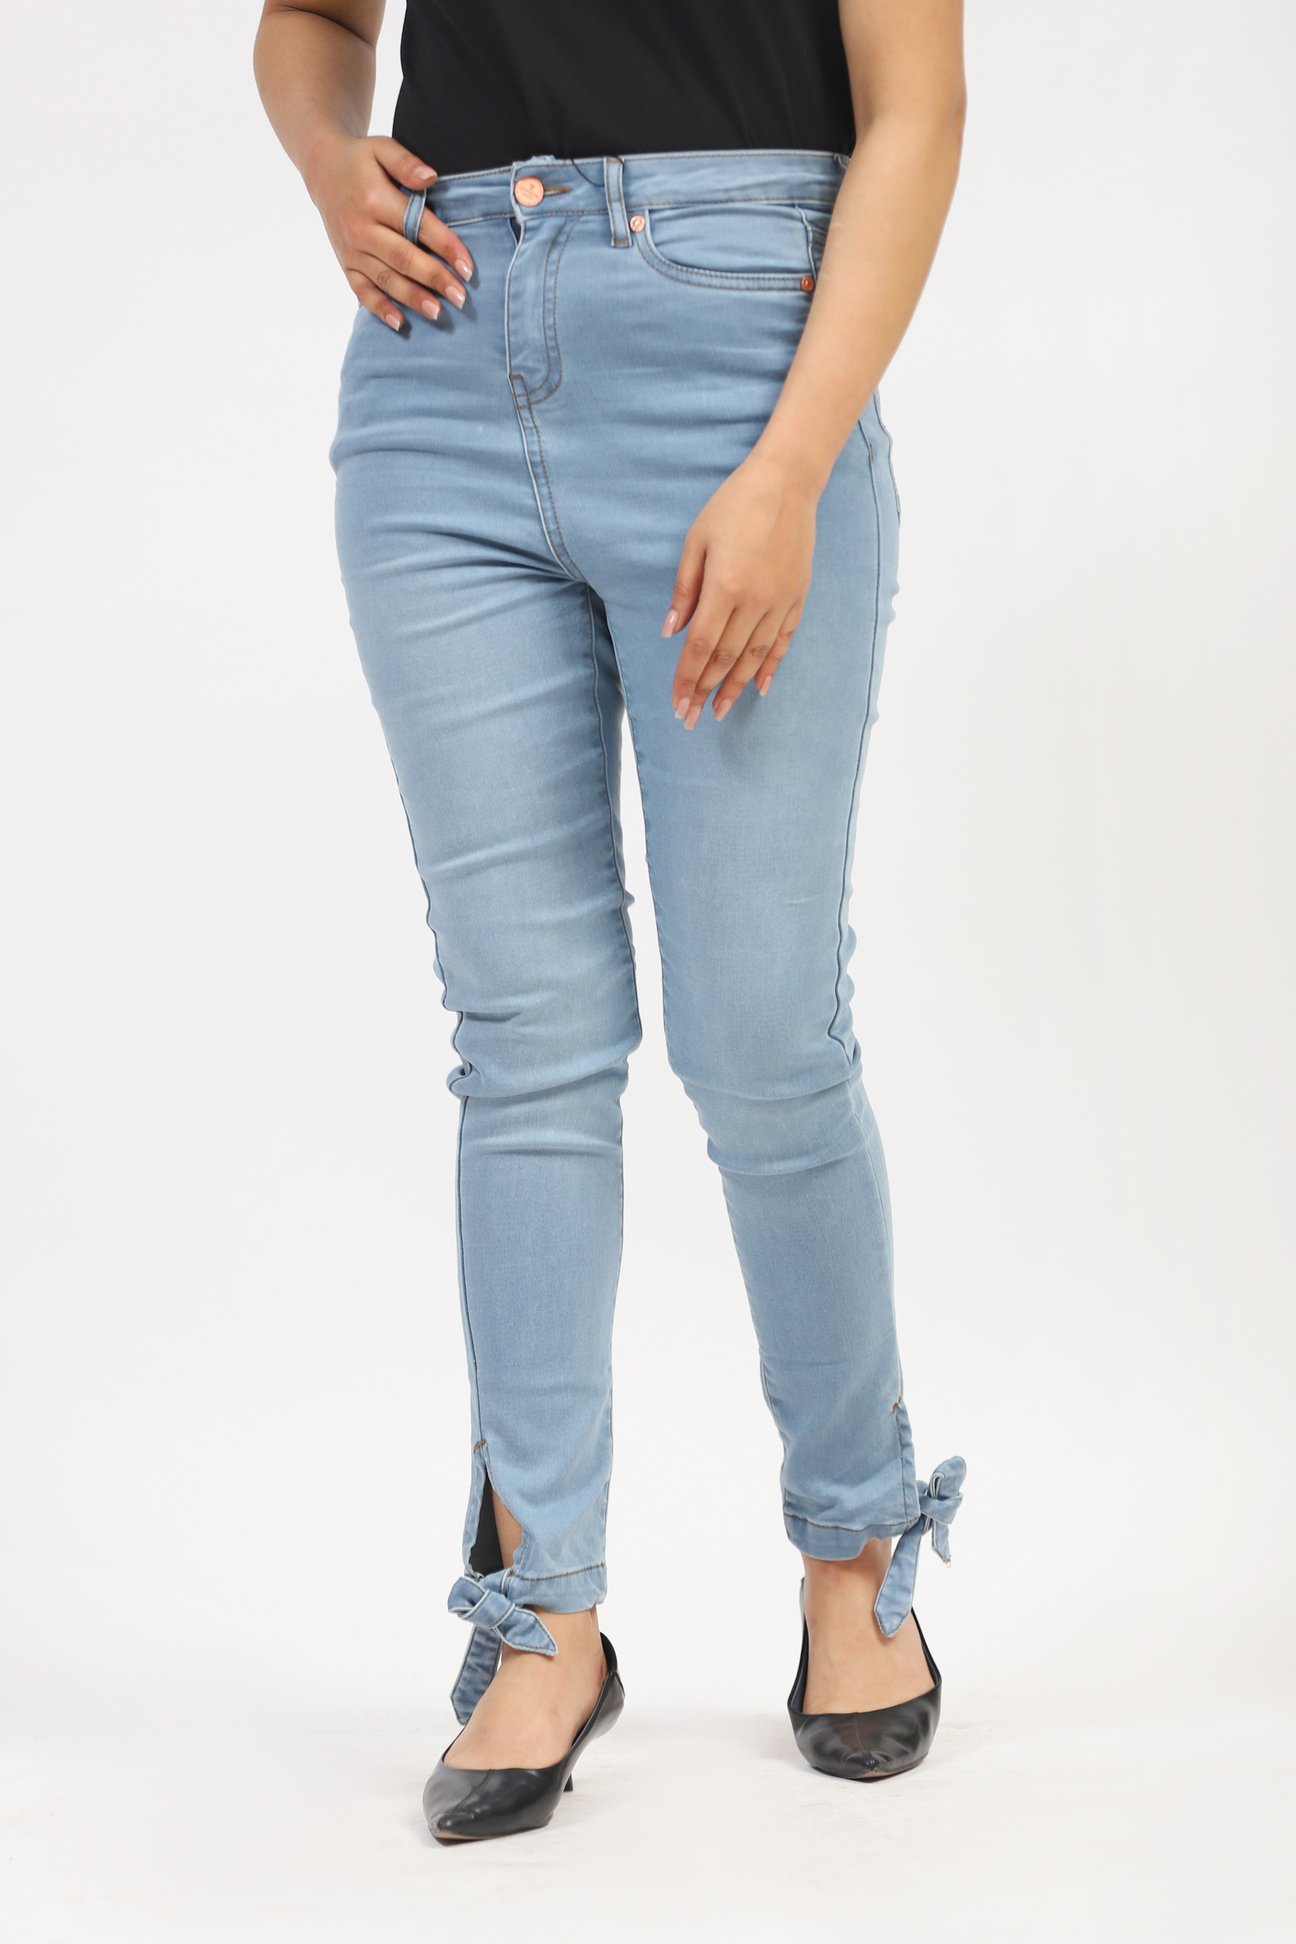 Blue Jeans With Bottom Knot